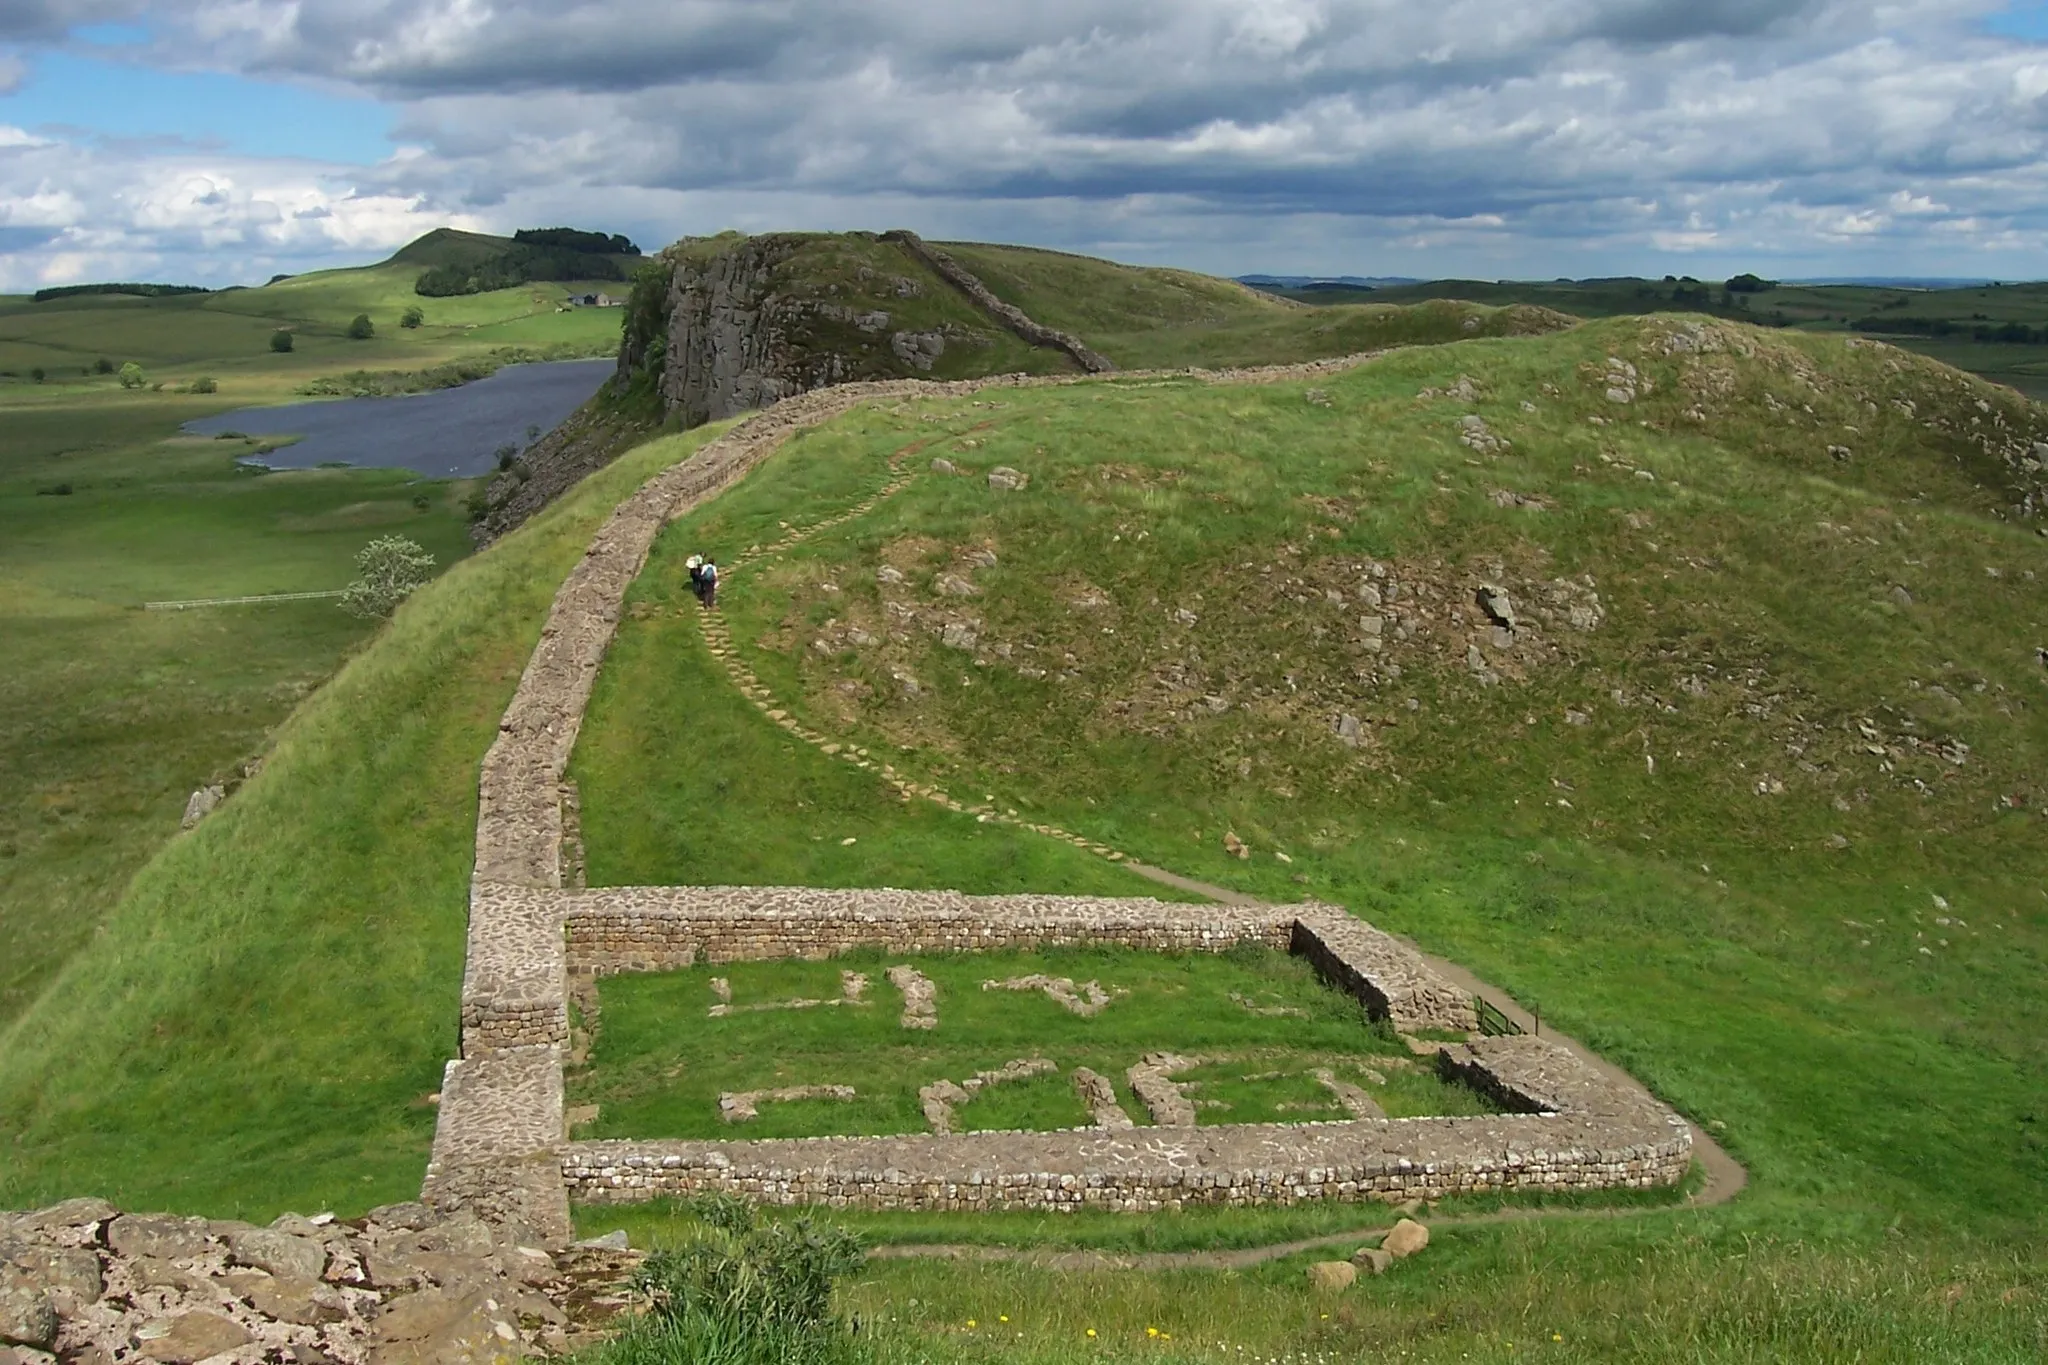 Photo showing: The remains of Milecastle 39 (coordinates 55° 0' 13.12" N, 2° 22' 32.74" W) on Hadrian's Wall; near Steel Rigg, looking east from a ridge along the Hadrian's Wall Path. Milecastle 39 is also known as Castle Nick.